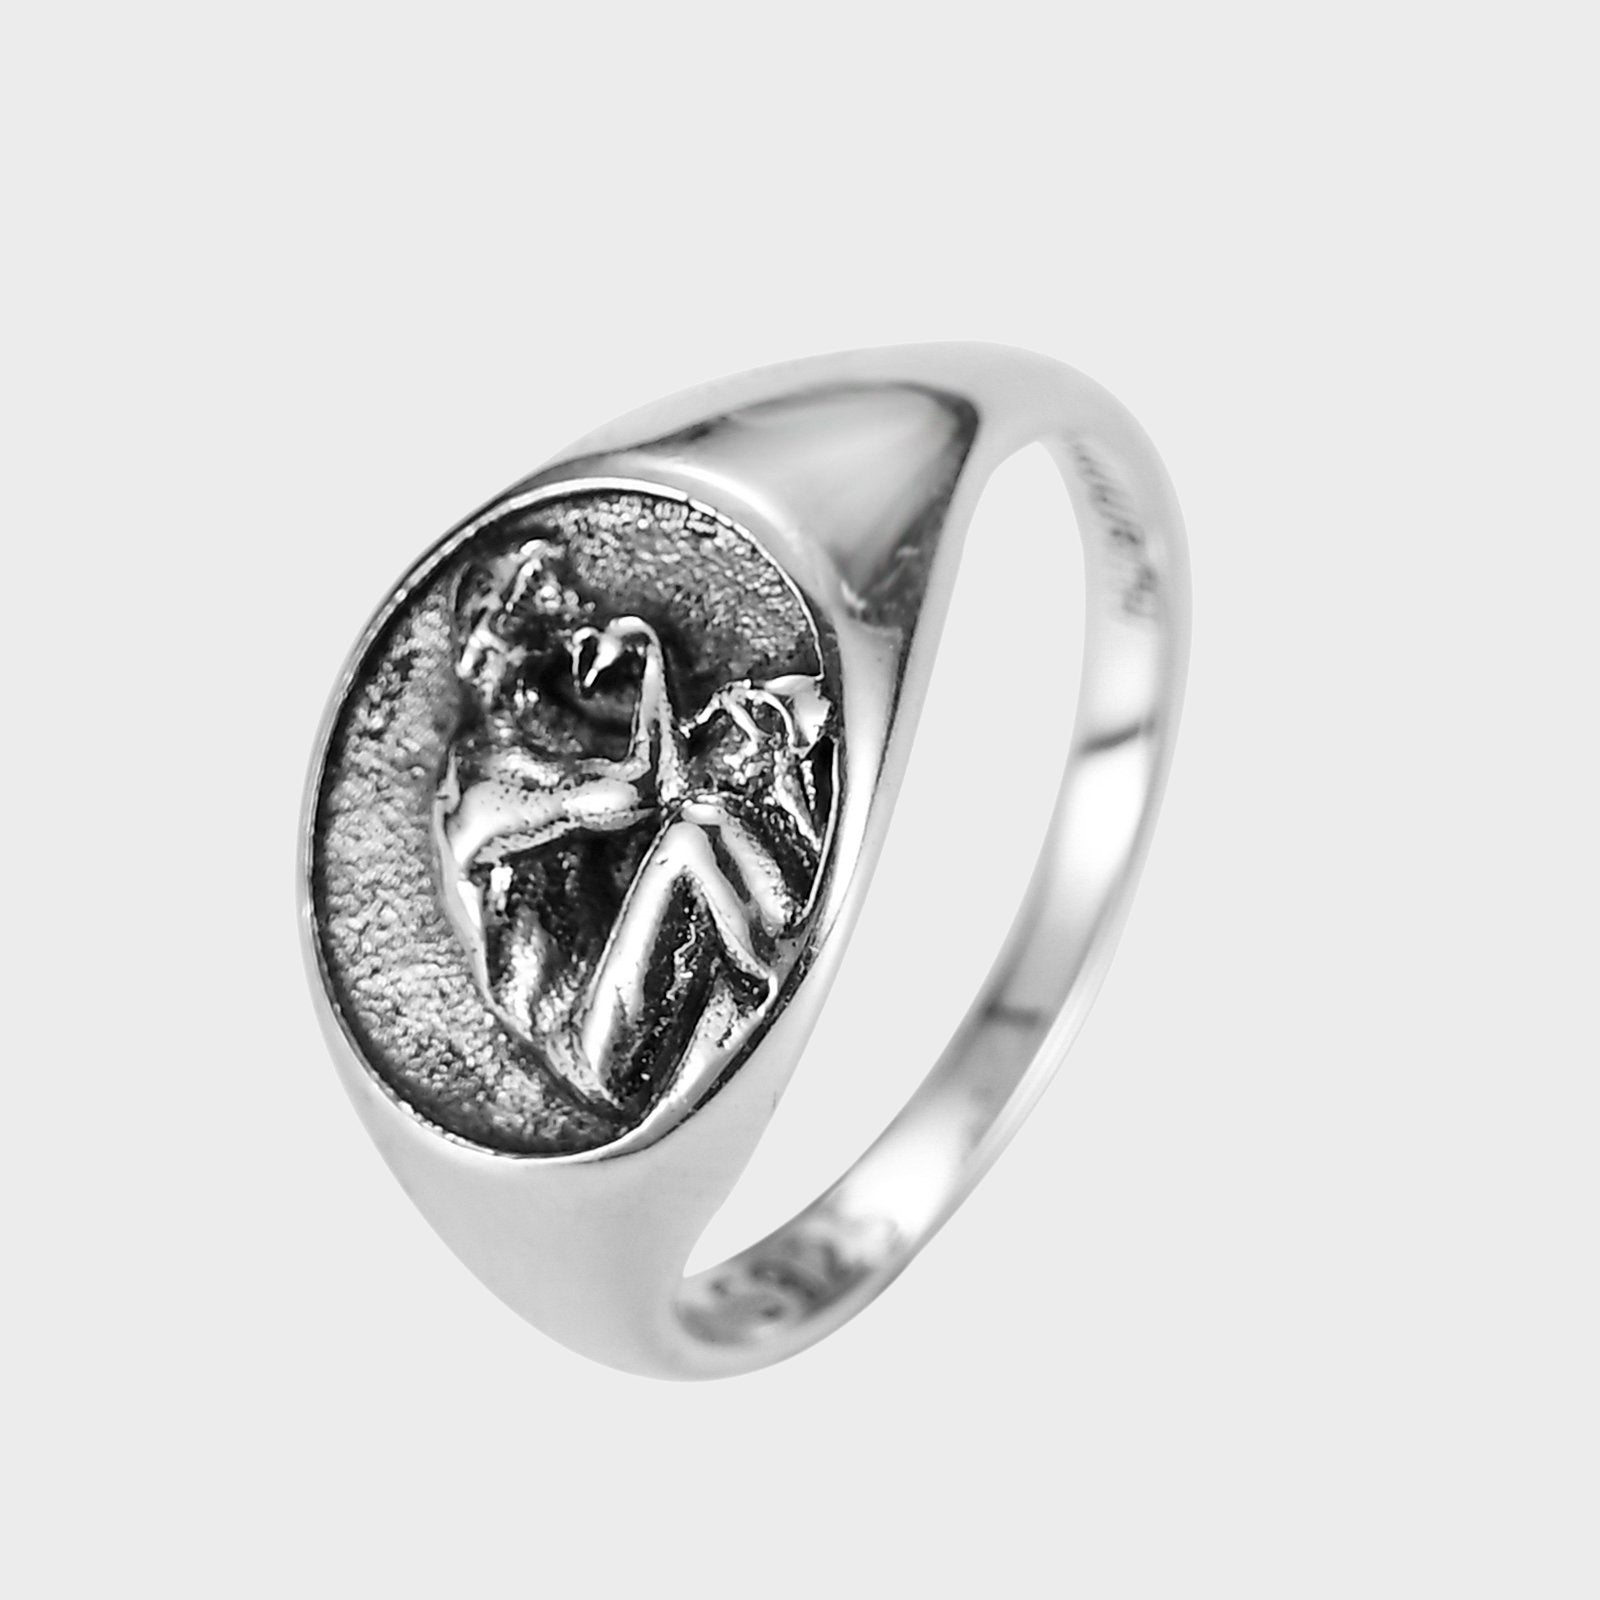 The Thinker - Ring